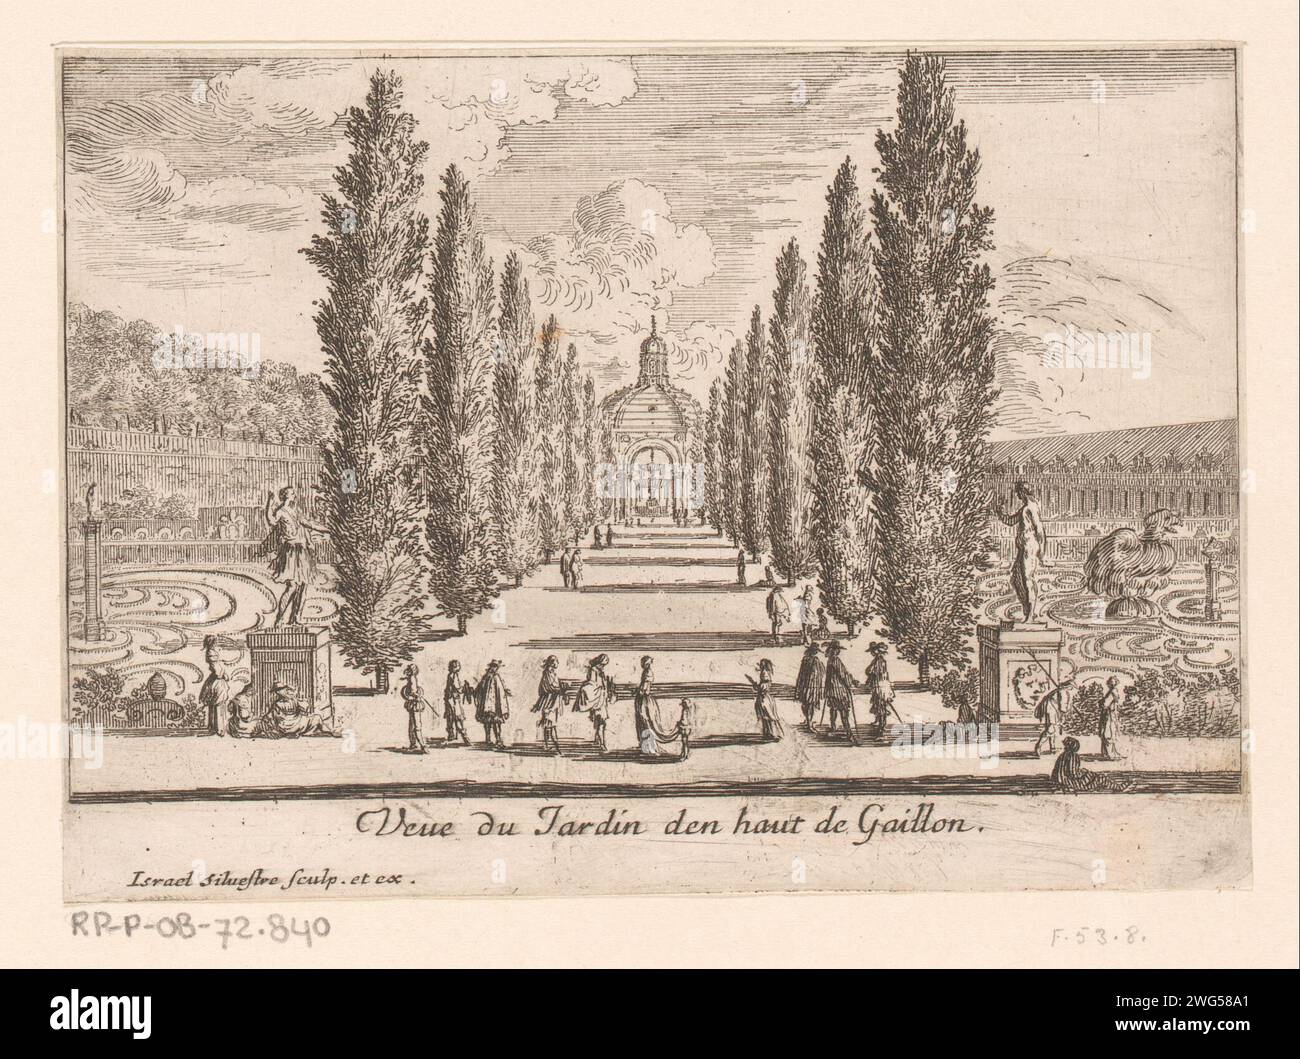 View of the garden from Gaillon Castle, Israel Silvestre, 1631 - 1691 print  France paper etching French or architectonic garden; formal garden Castle of Gaillon Stock Photo